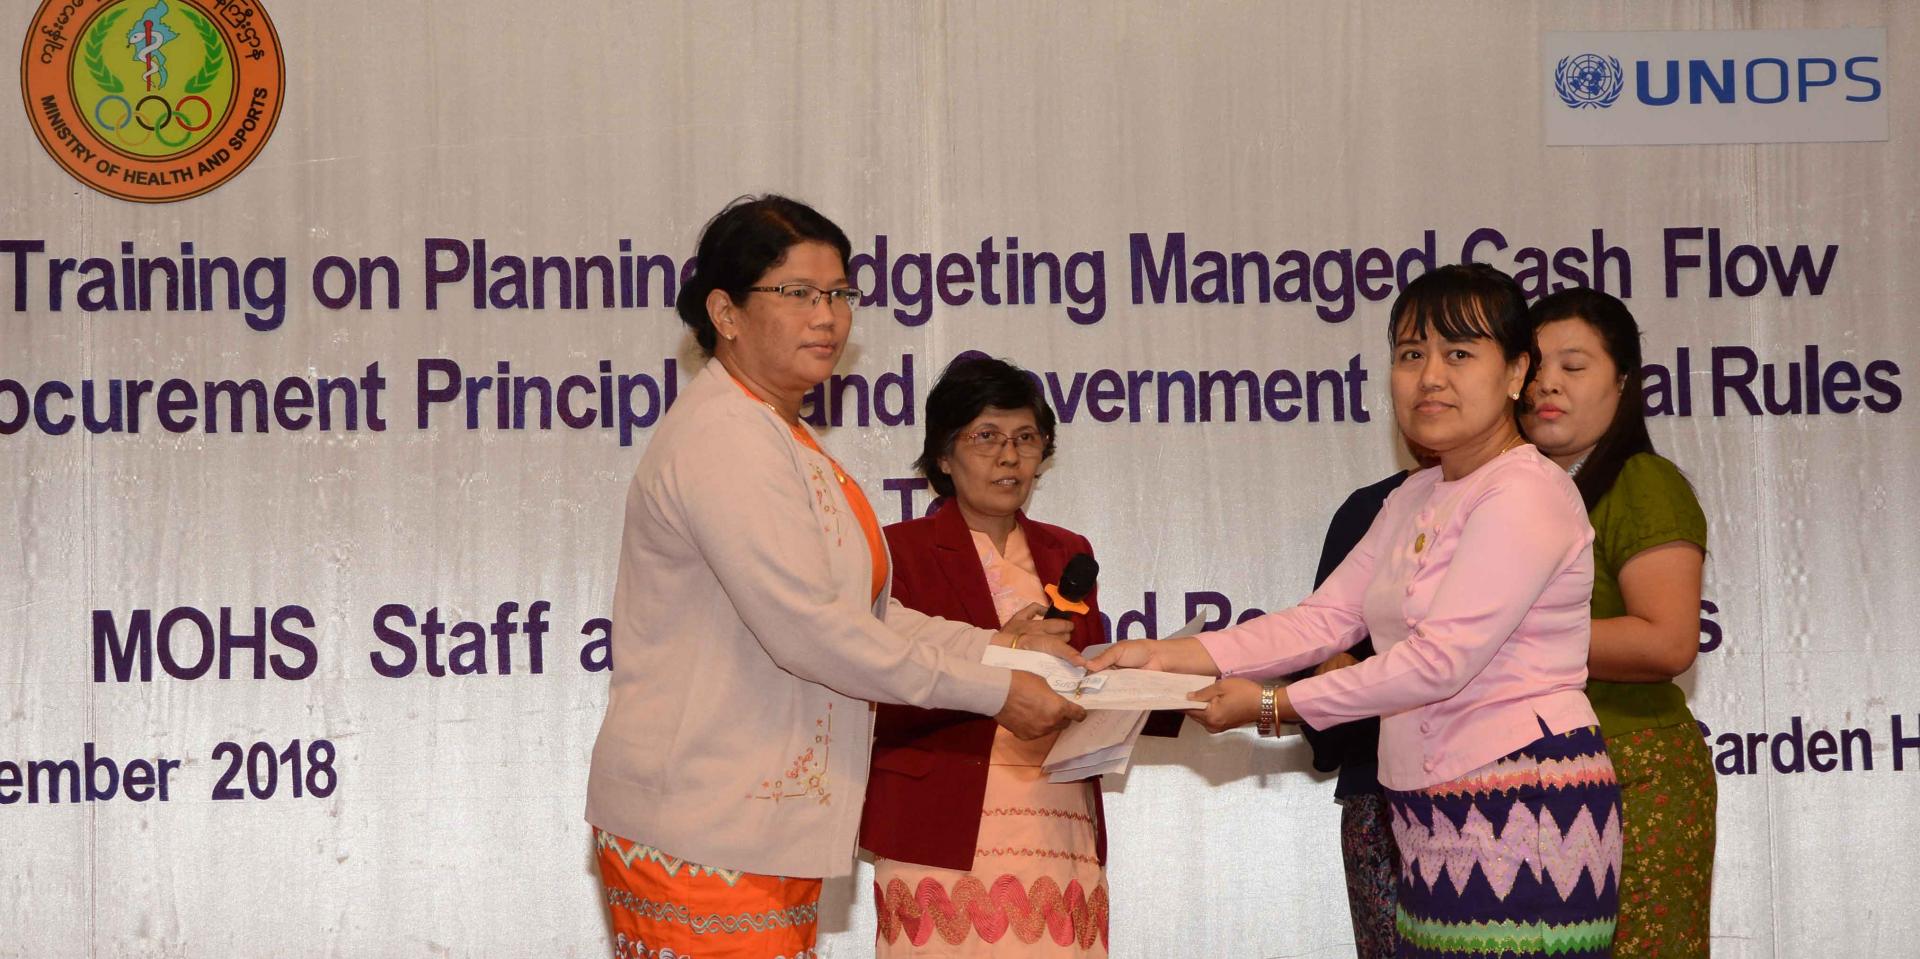 MOHS Yangon Region North District Health Department Deputy Director Dr Khin Sandar Aung presents prizes to participants who scored high marks in the practical workplanning exercises. Photo: UNOPS